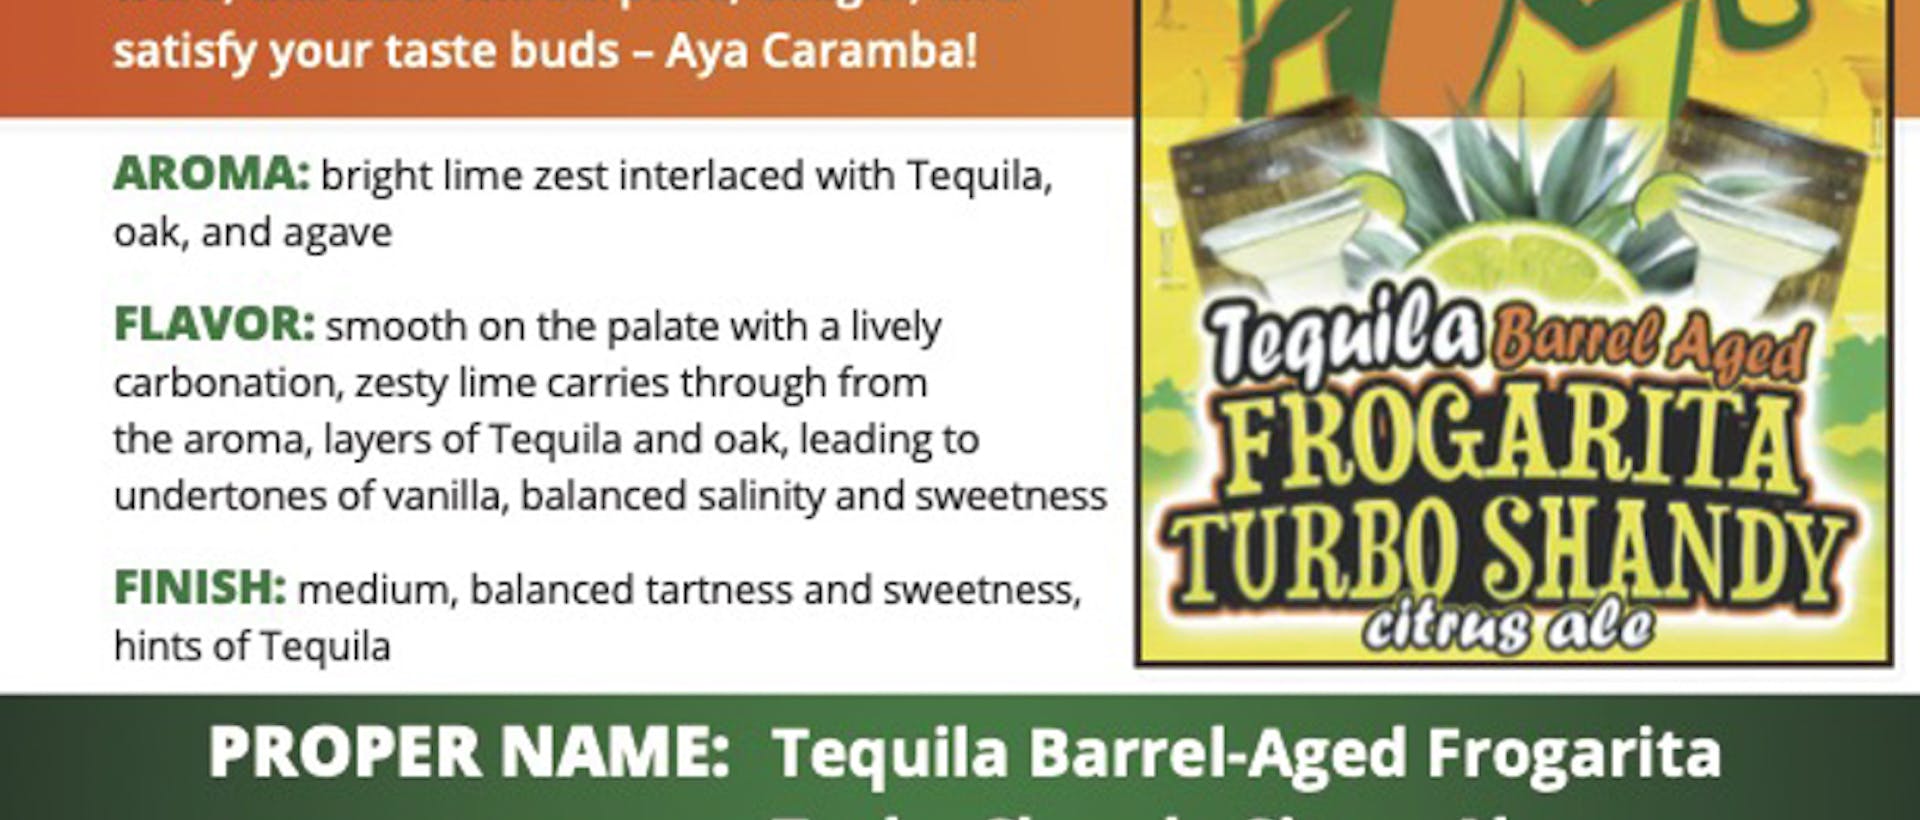 HF_Sell Sheet - Barrel-Aged Series - Tequila Barrel-Aged Frogarita Turbo Shandy Citrus Ale (updated 05-19-22)